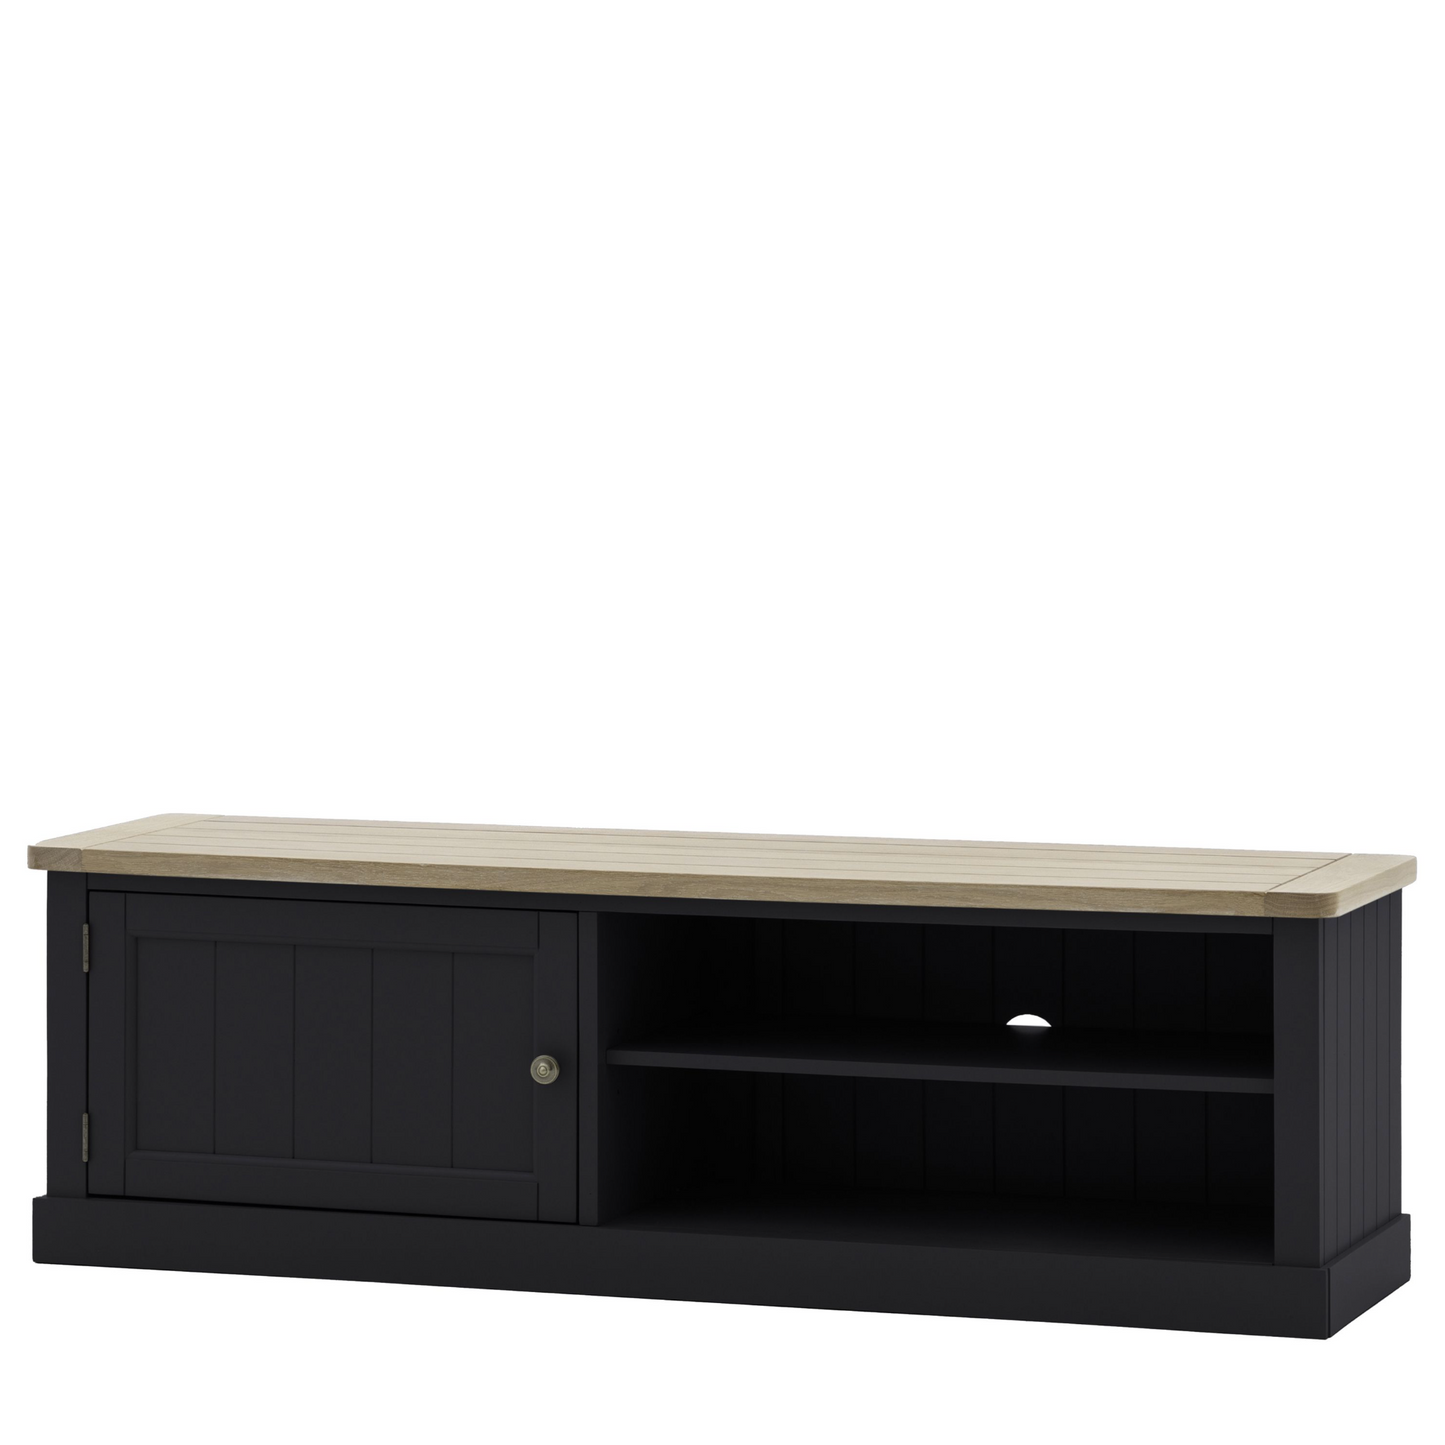 A Buckland Media Unit in Meteor with doors and drawers, perfect for interior decor and home furniture.